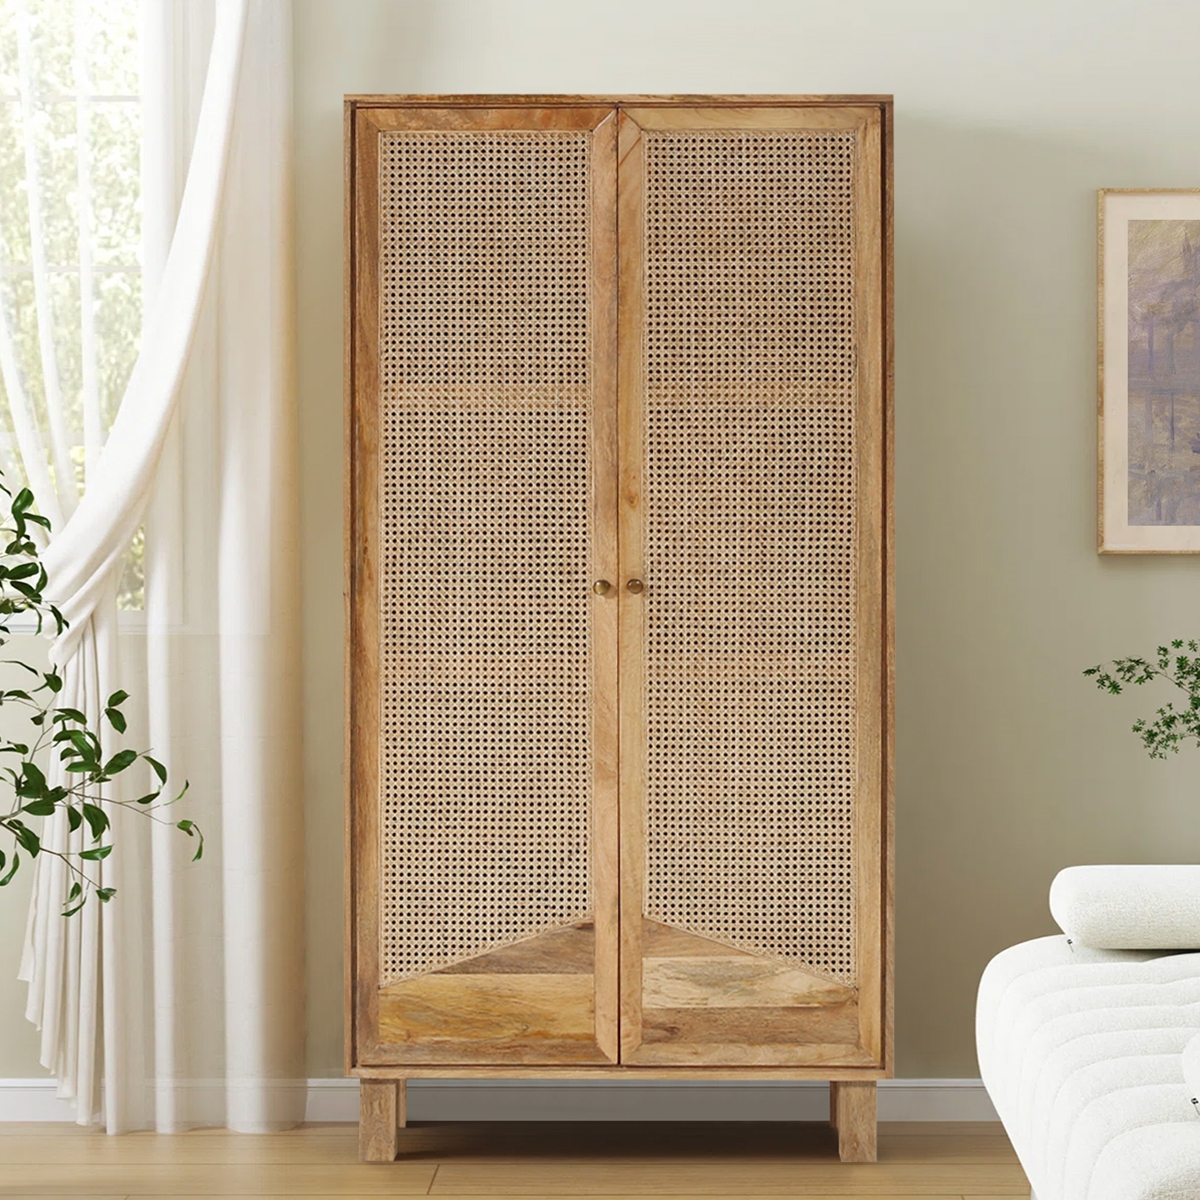 Rustic Storage Cabinet With Two Drawers And Four Classic Rattan